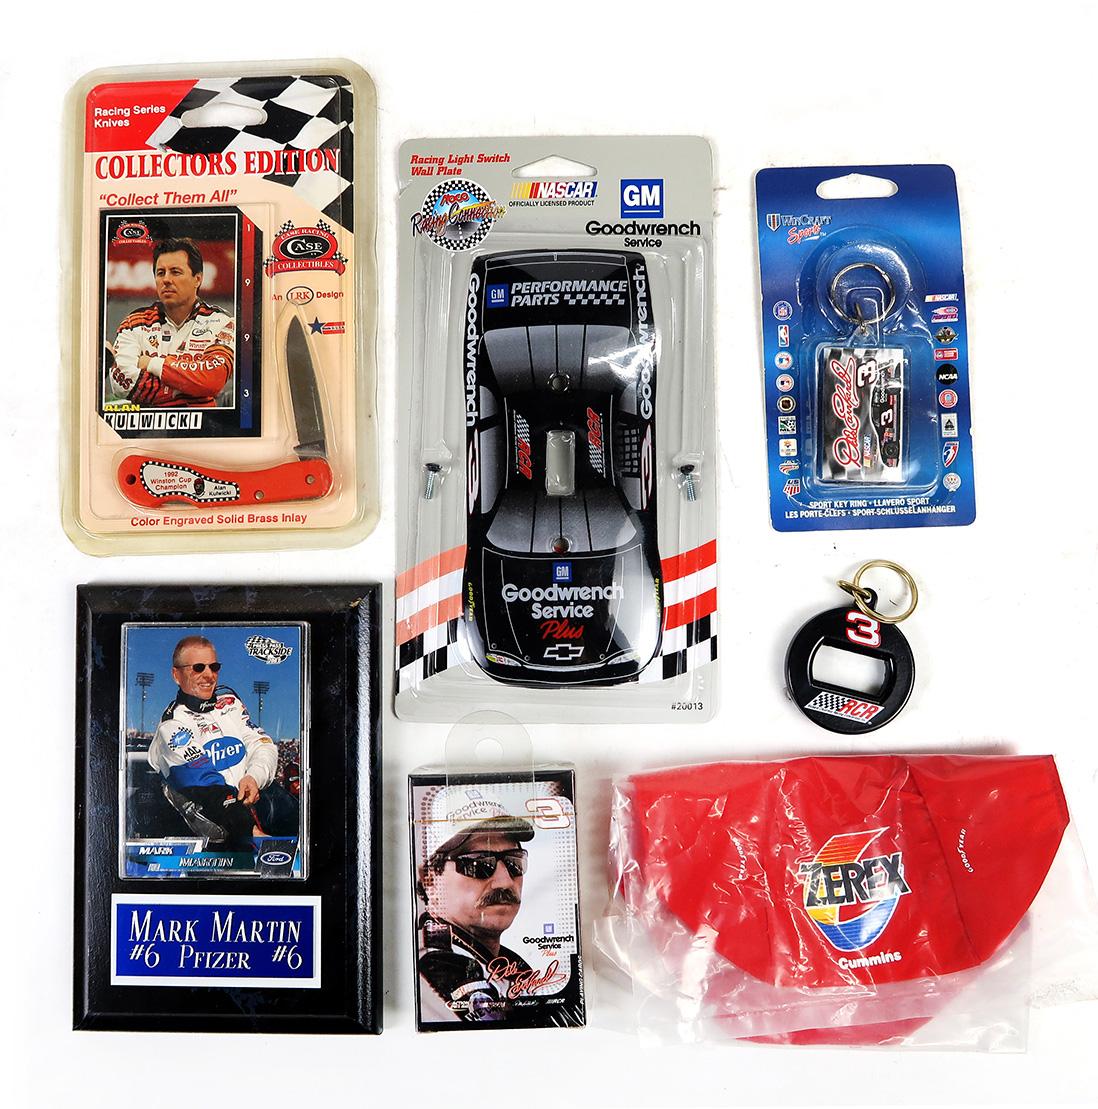 NASCAR (20), Goodwrench Service Plus Light Switch Cover, Fuzzy Dice, Dale E